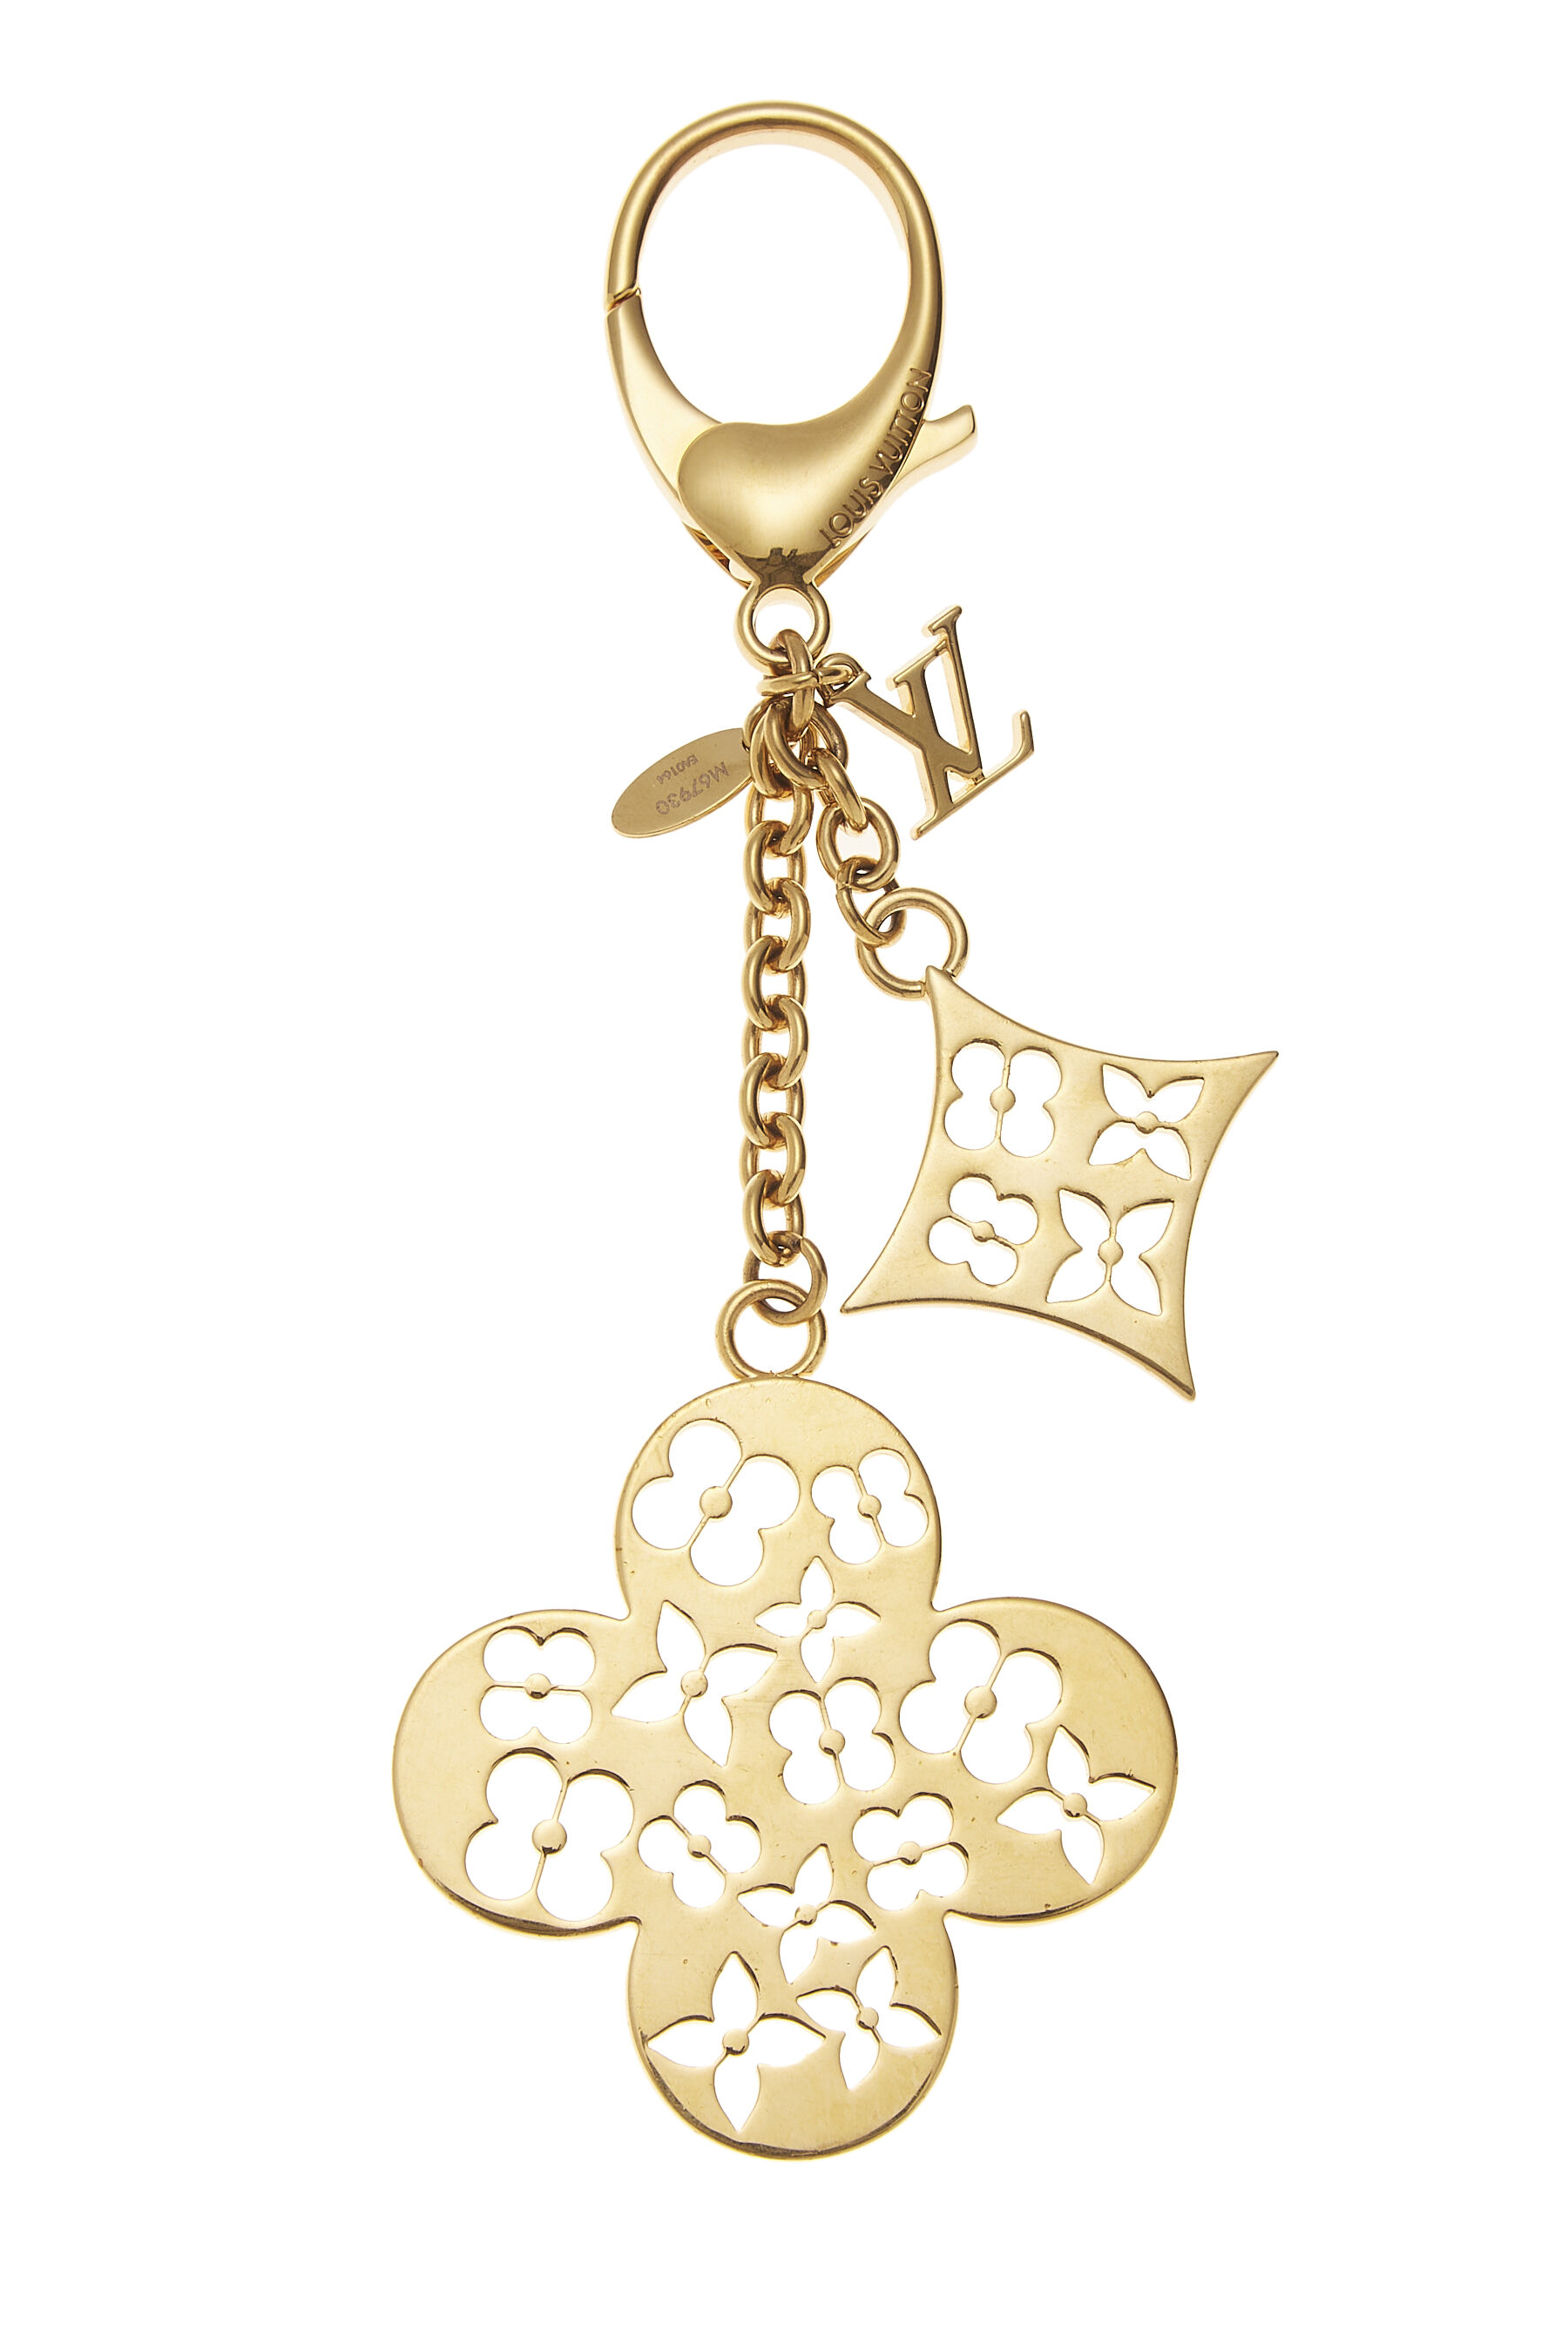 Louis Vuitton My LV Chain Bag Charm Gold in Gold Metal - US